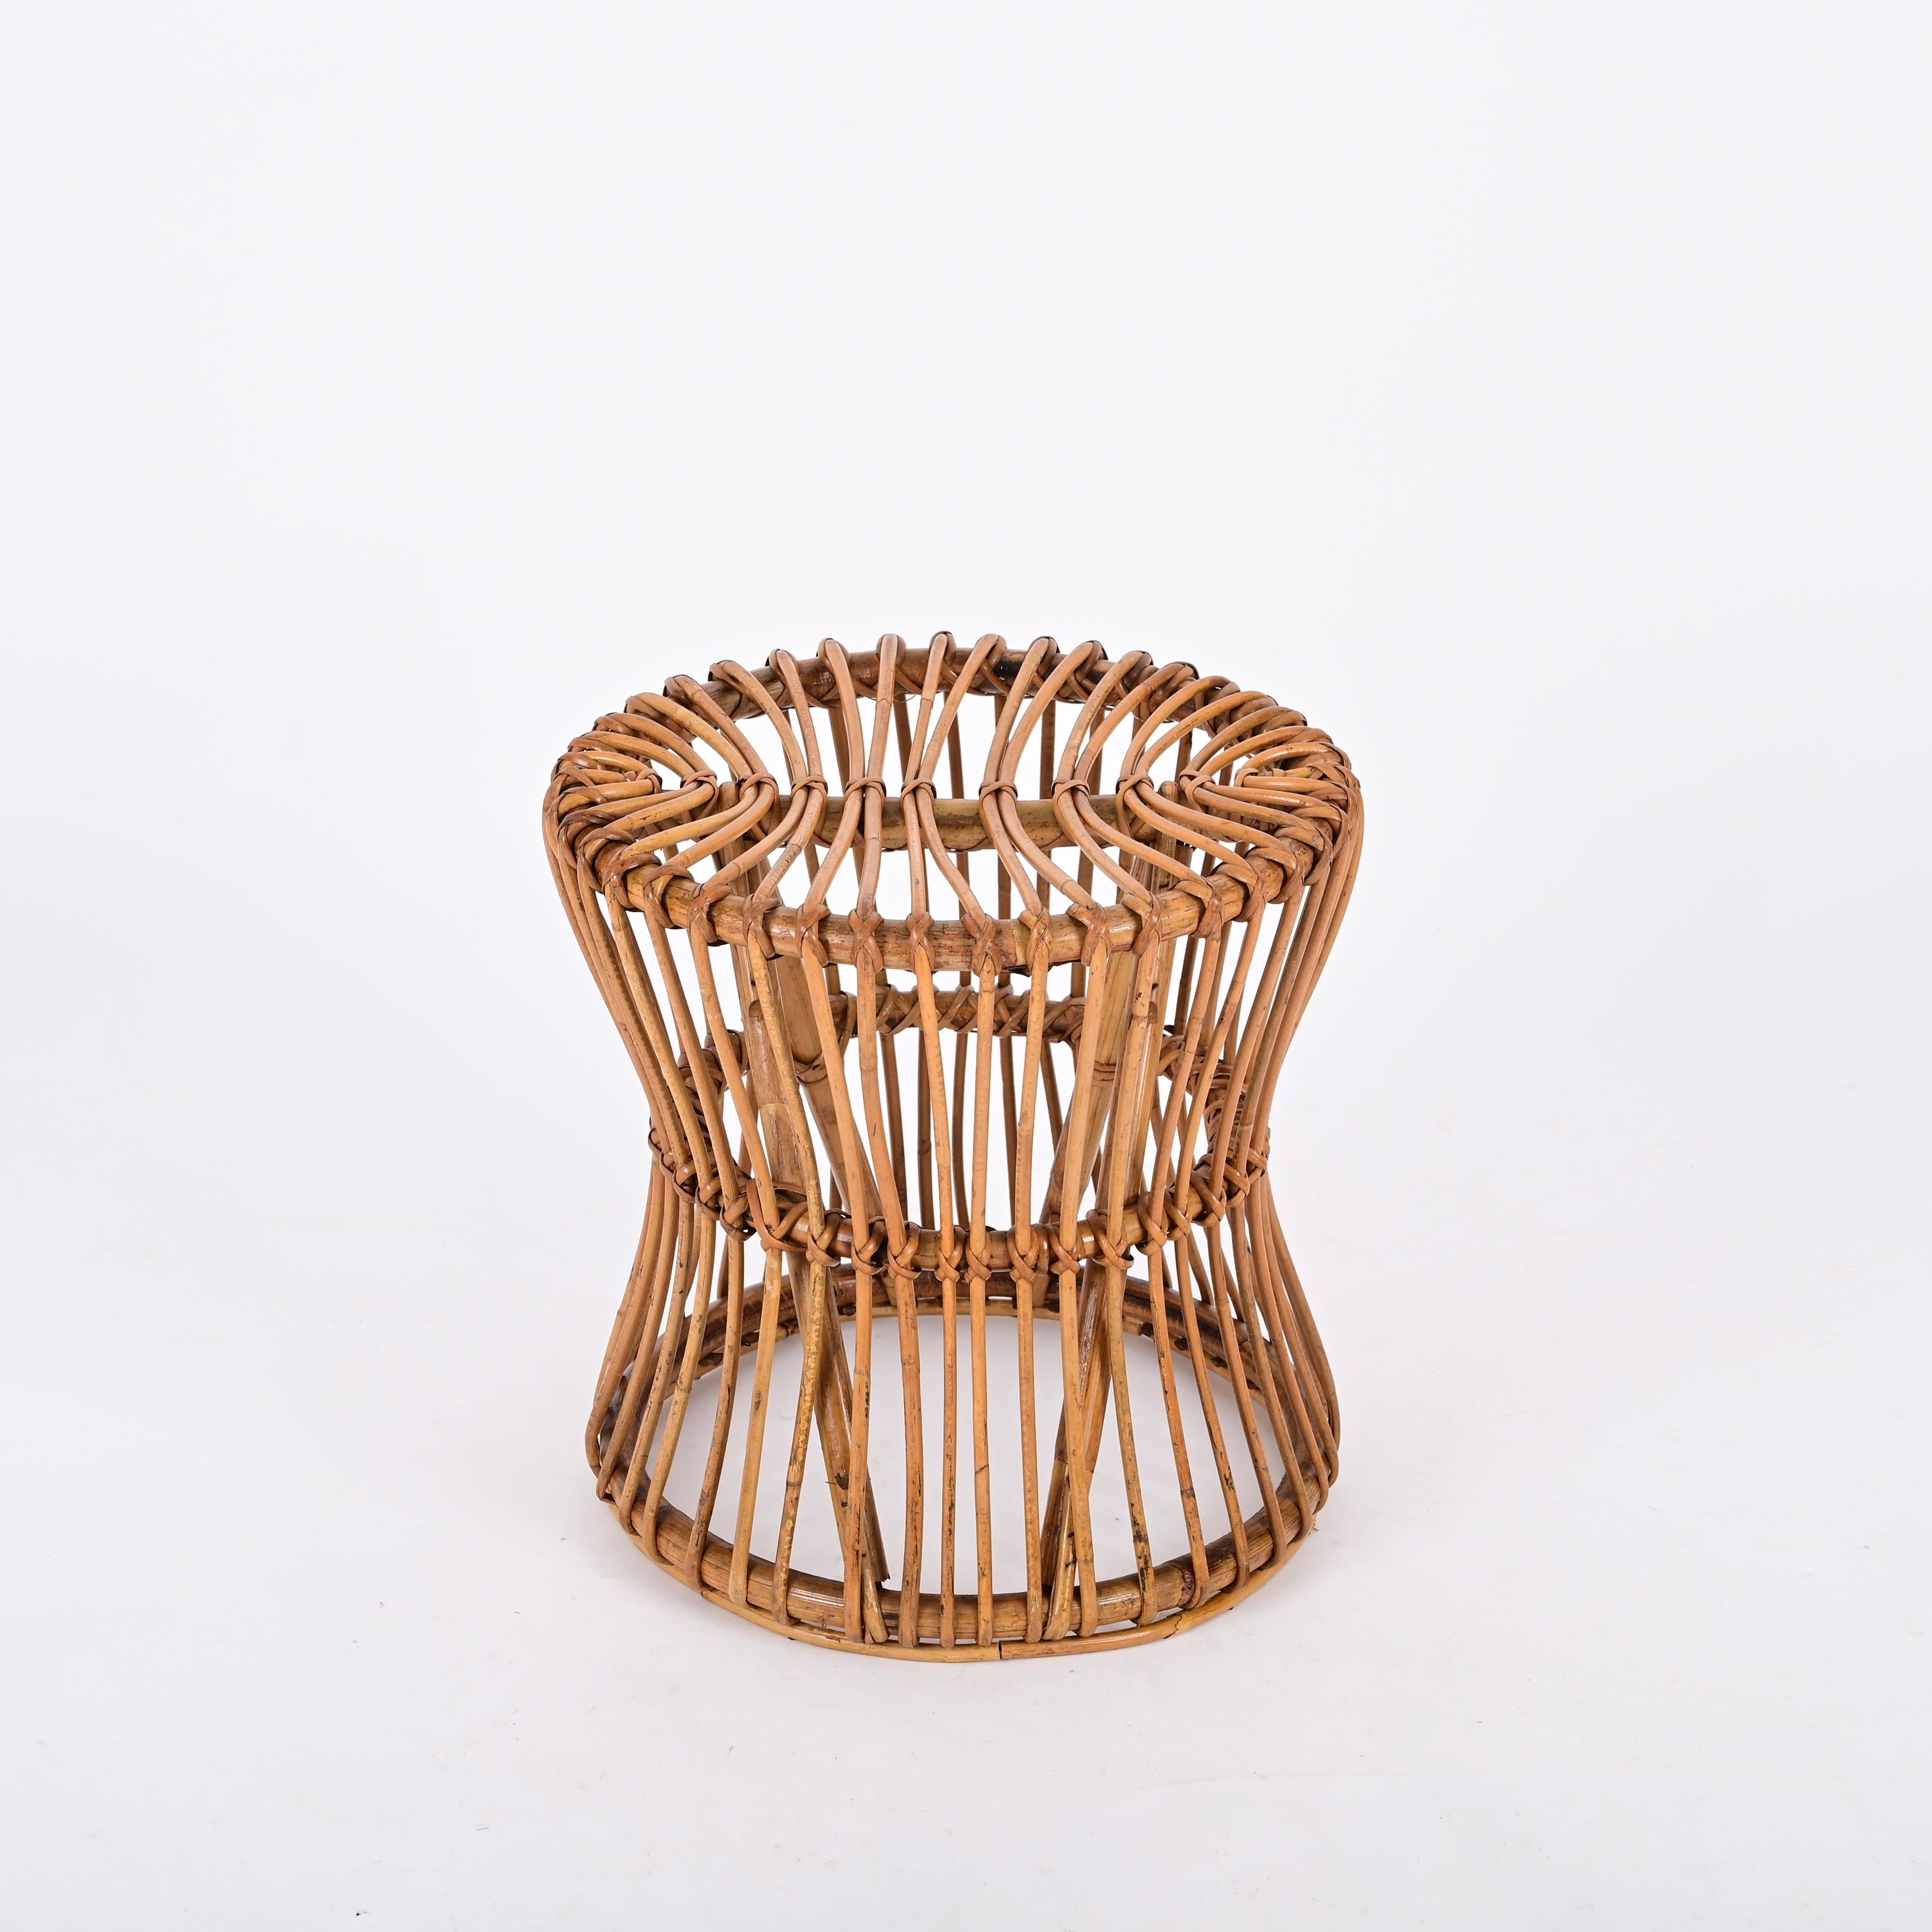 Midcentury French Riviera Pouf Stool in Rattan and Woven Wicker, Italy, 1960s For Sale 1